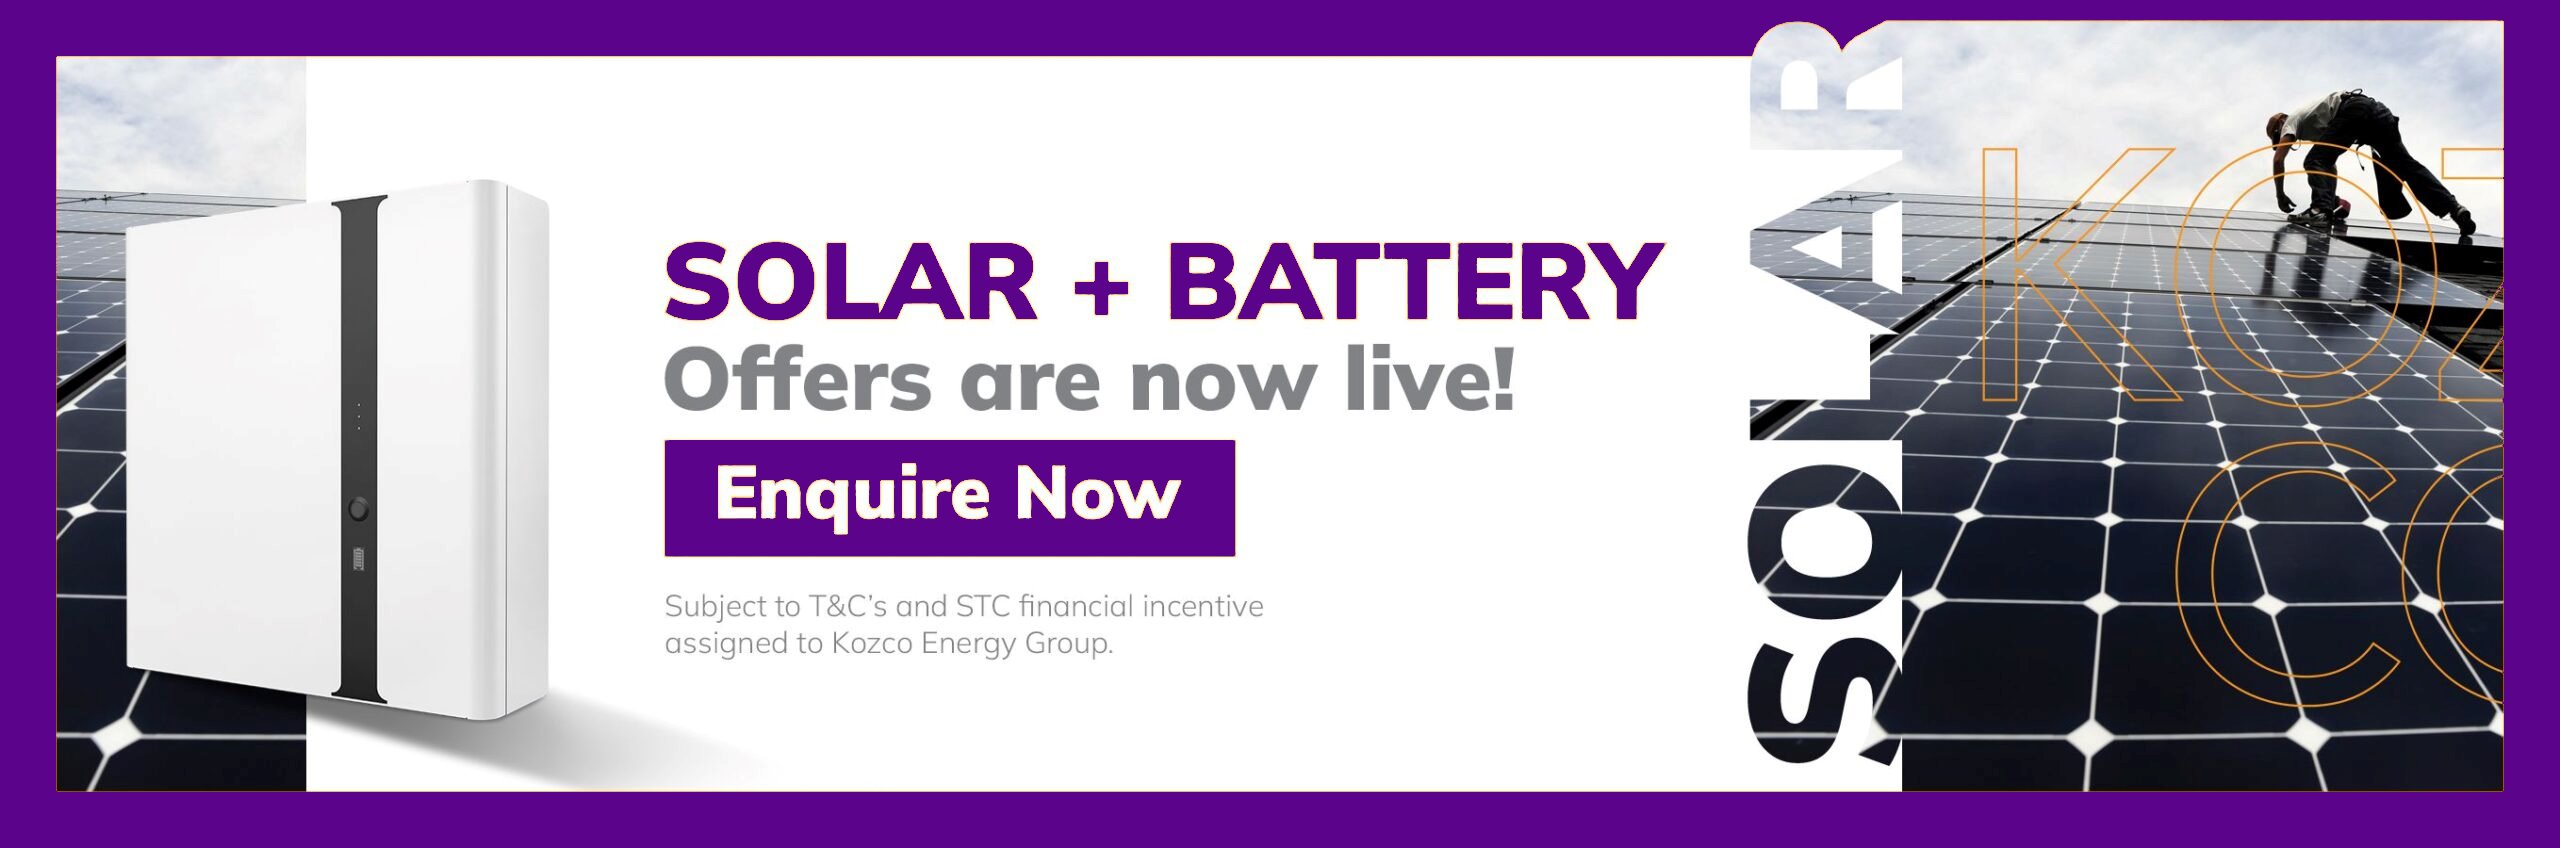 Solar + Battery Offers are now live! Enquire now